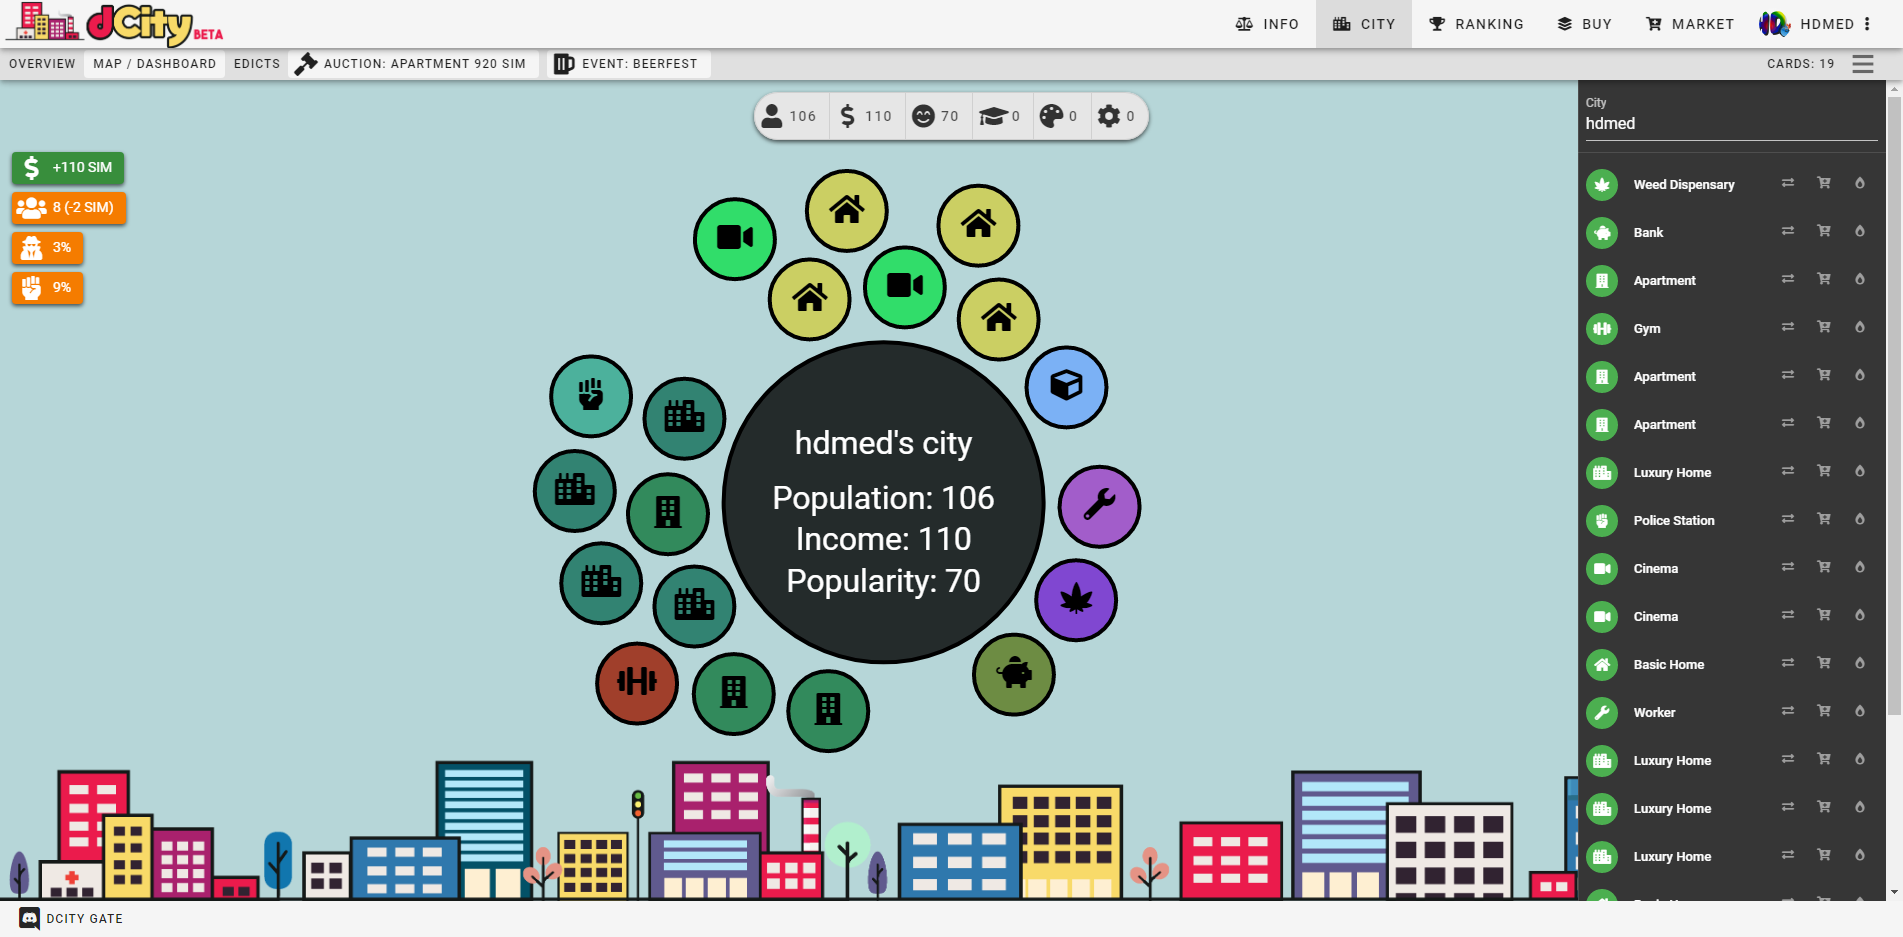 dCITY_io_City (5).png